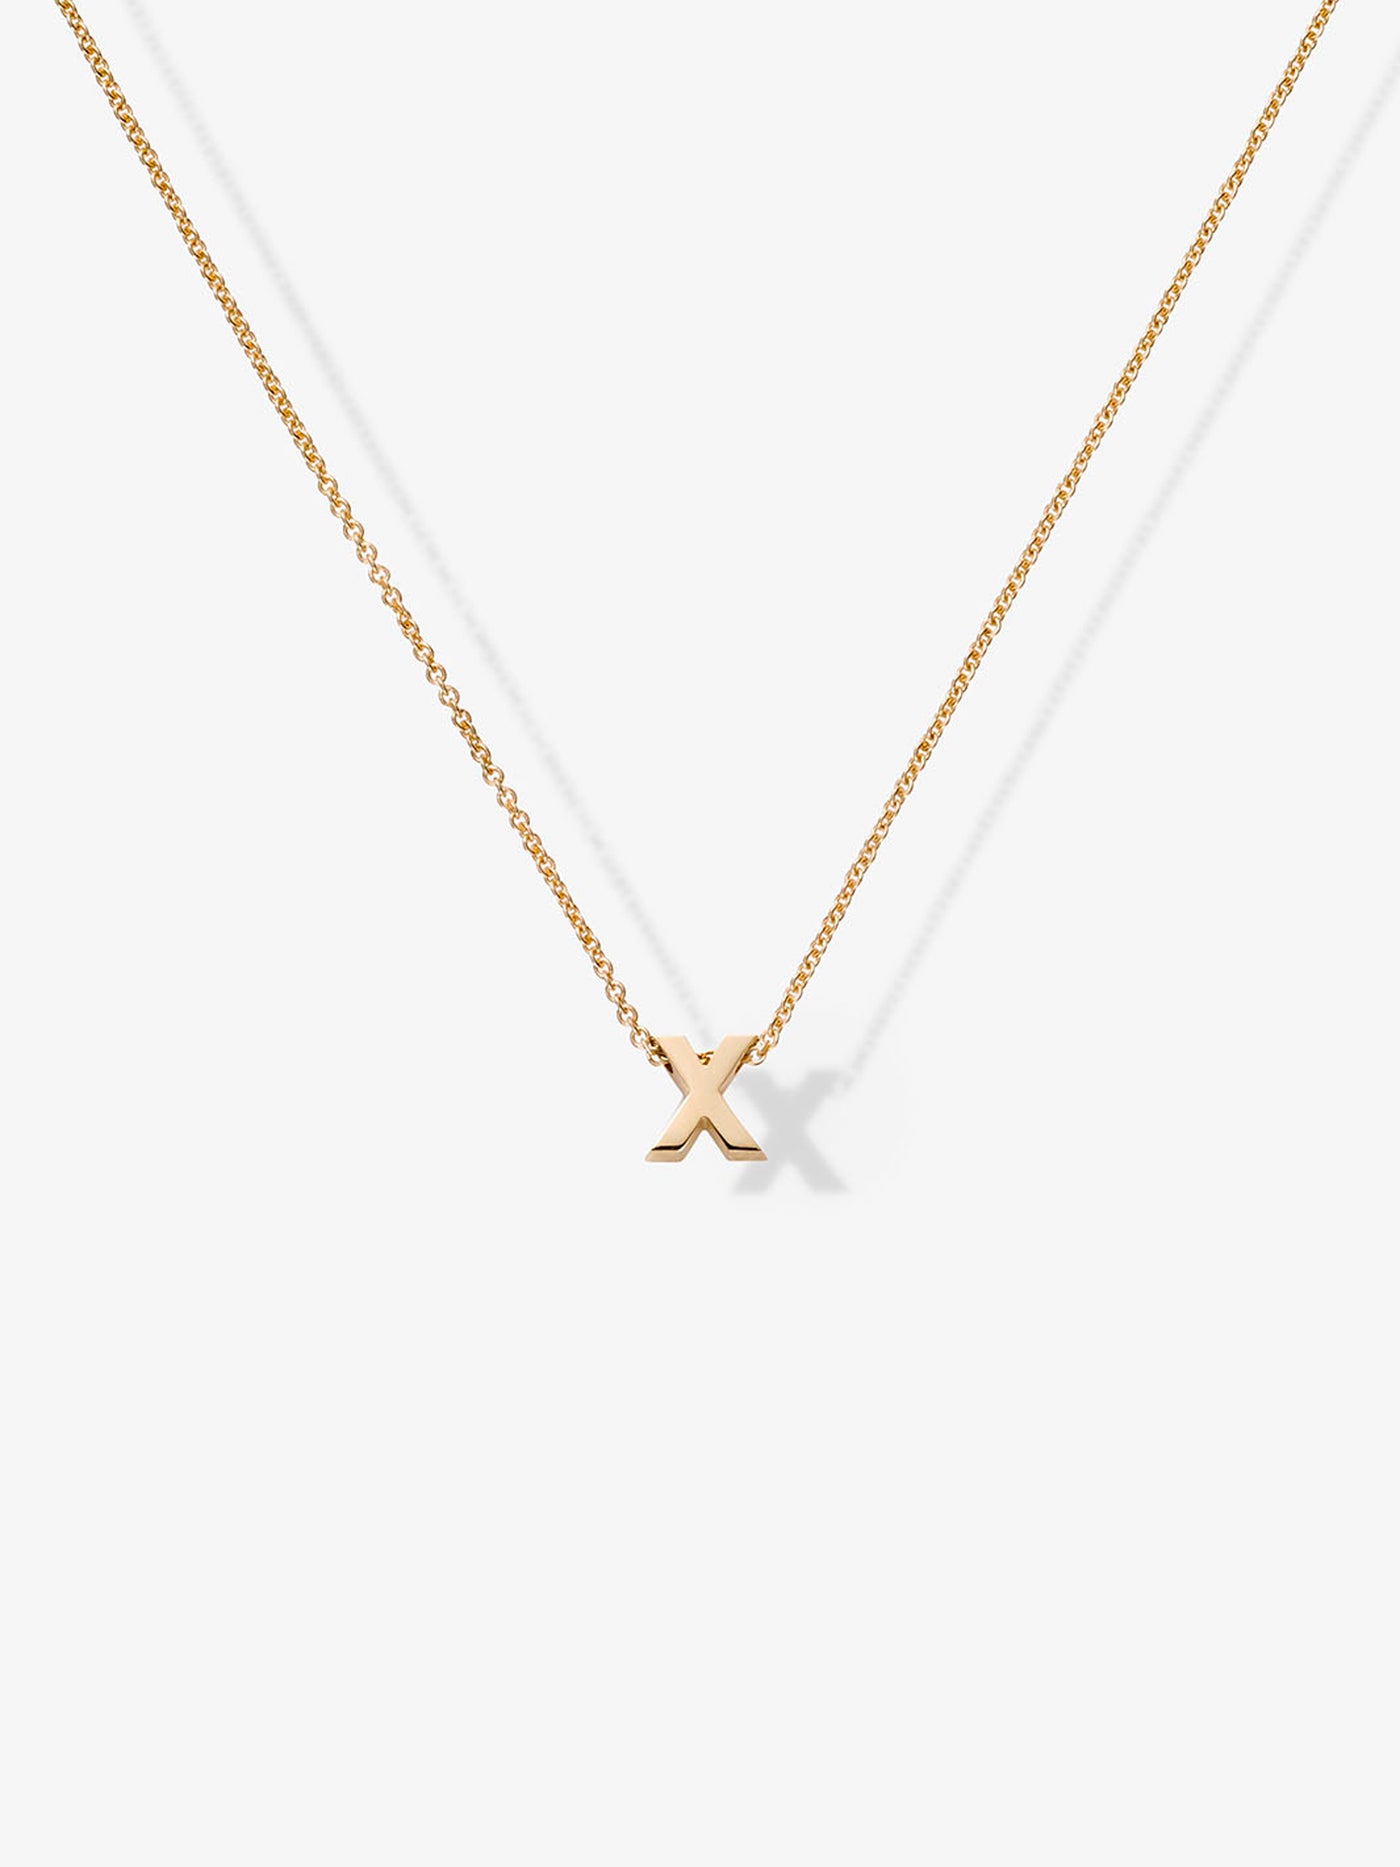 Letter X Necklace in 18k Gold